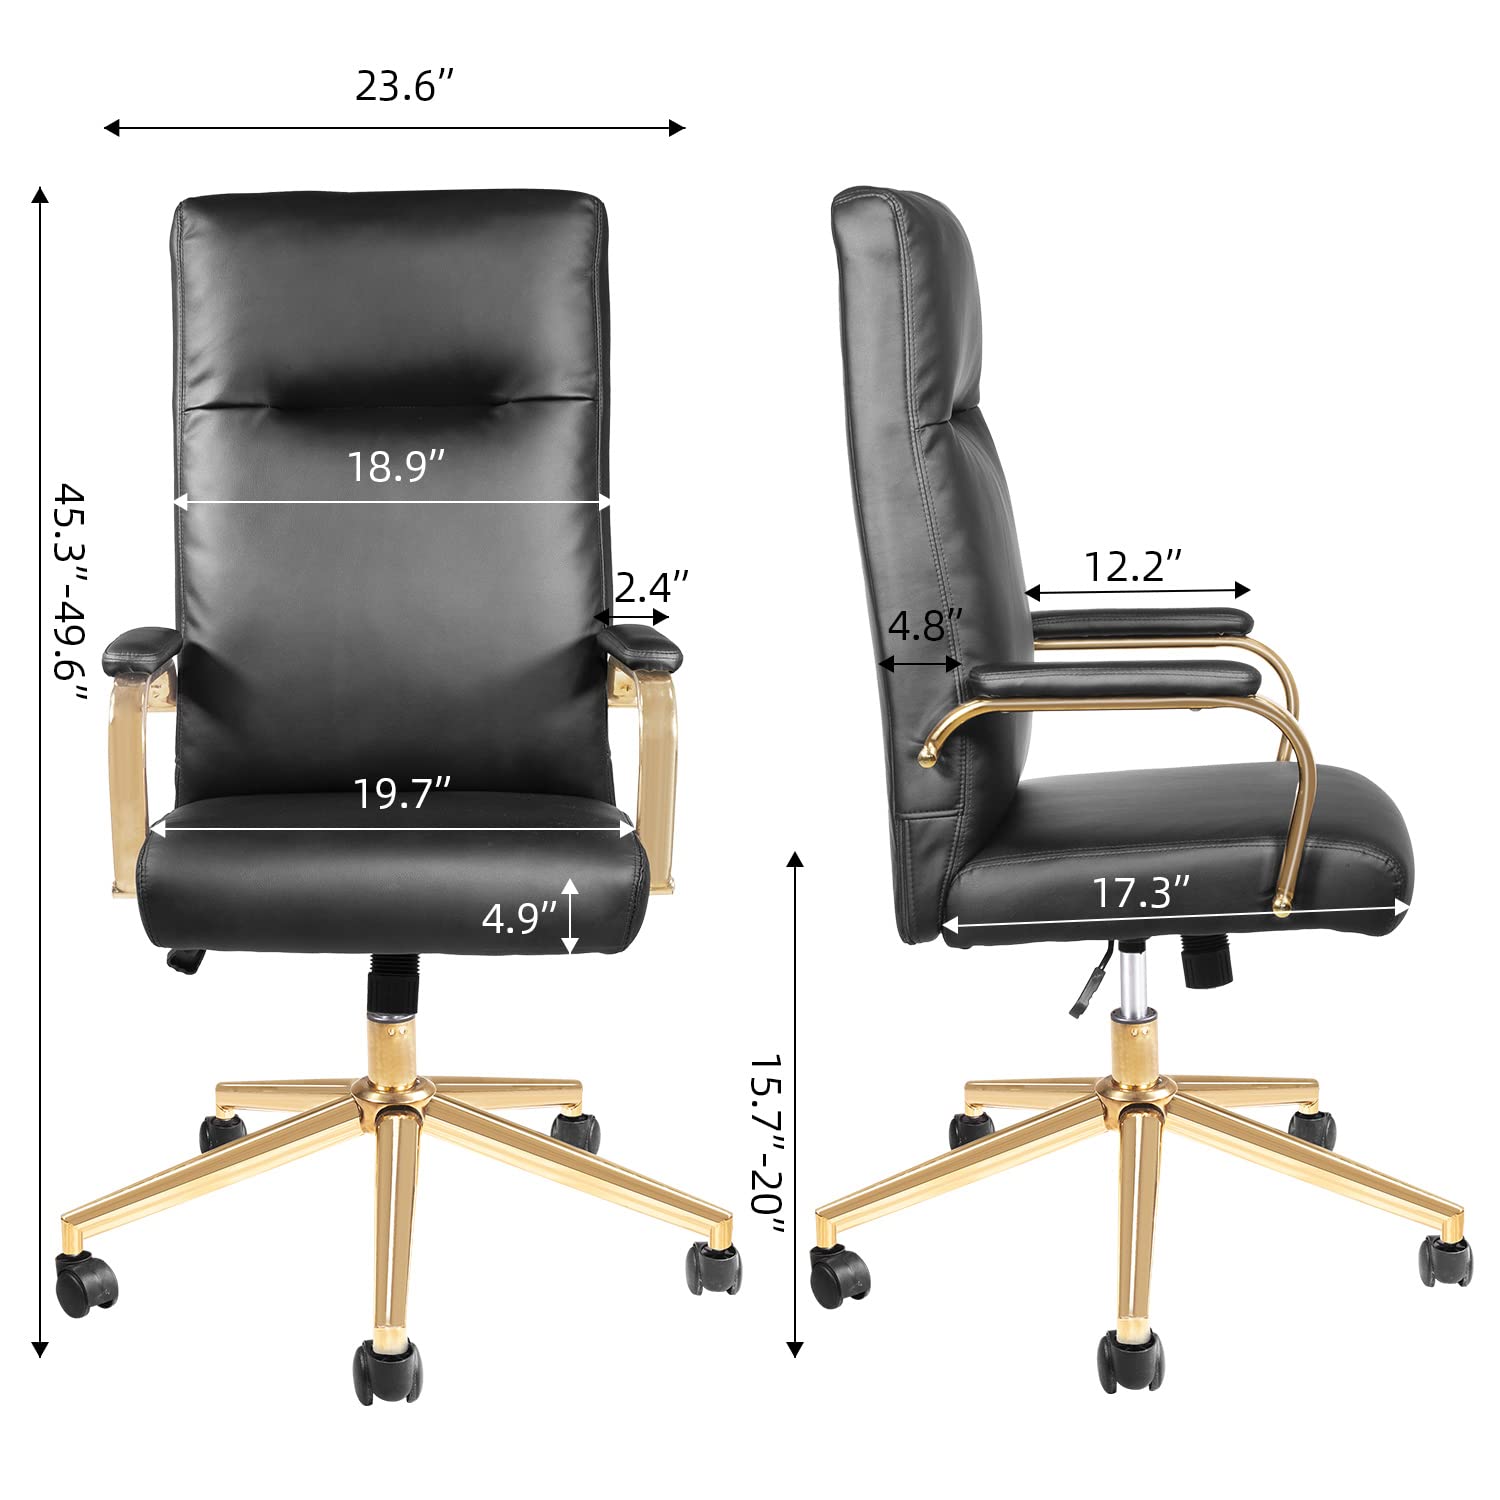 Toszn Comfy Desk Chairs White and Gold,High Back Leather Office Chair with Back Support and Armrest, Ergonomic Compuer Chairs with Wheels and Gold Legs,White